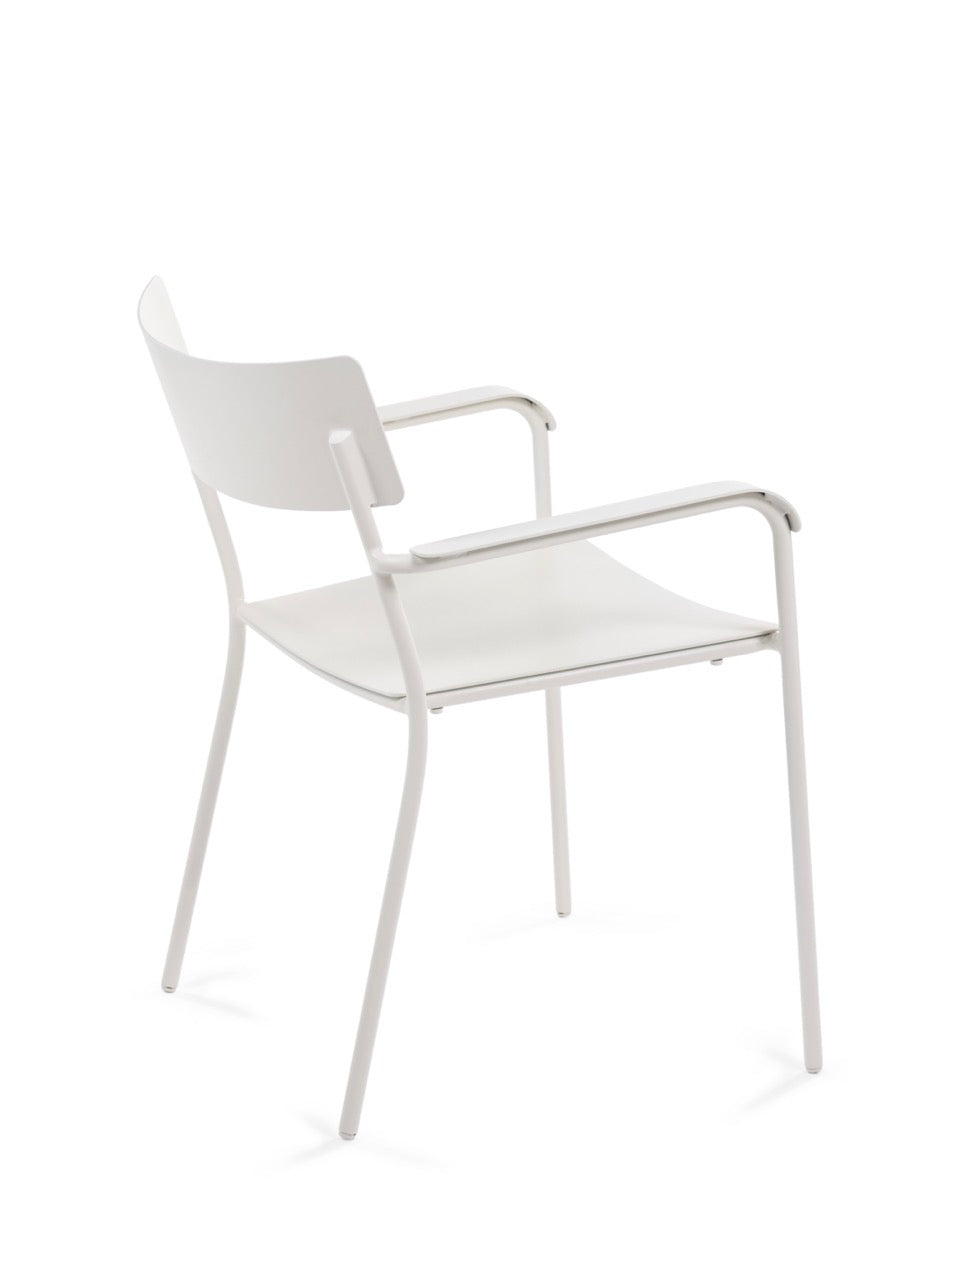 Serax August chair with armrests by Vincent Van Duysen set of 2